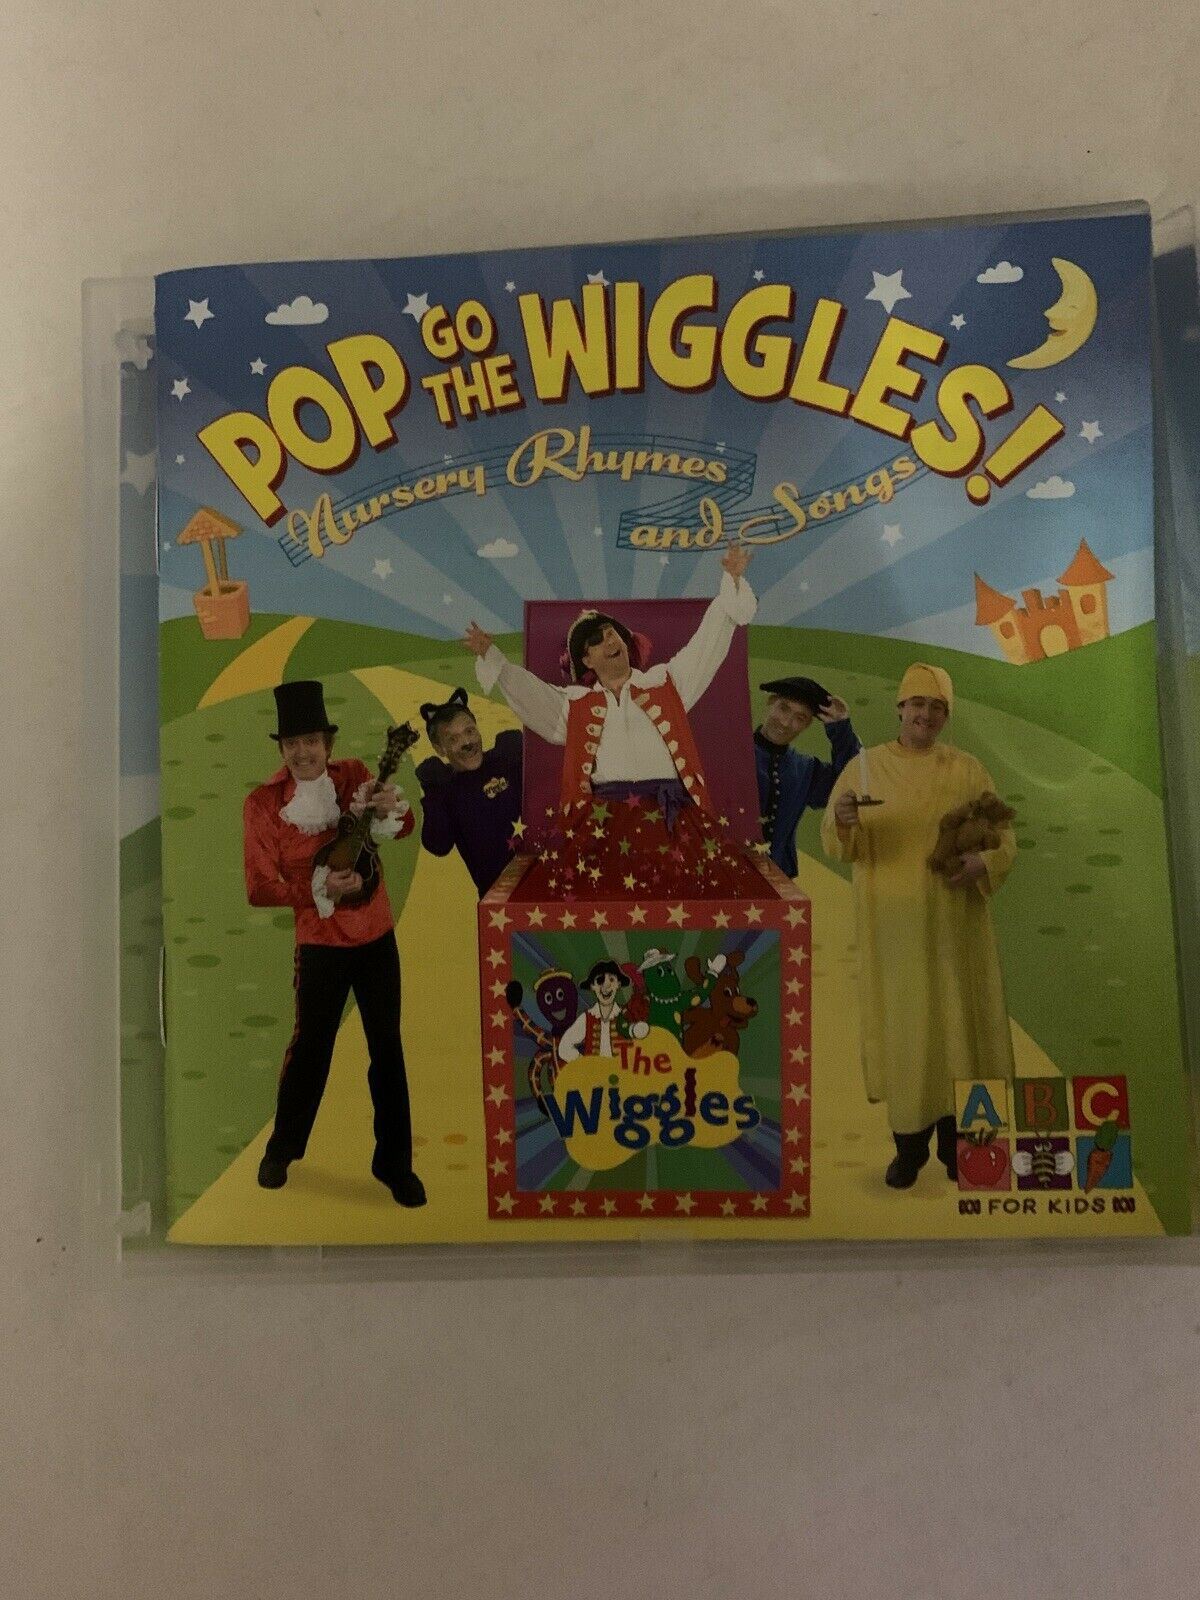 THE WIGGLES - Pop Go The Wiggles Nursery Rhymes CD 2007 ABC For Kids